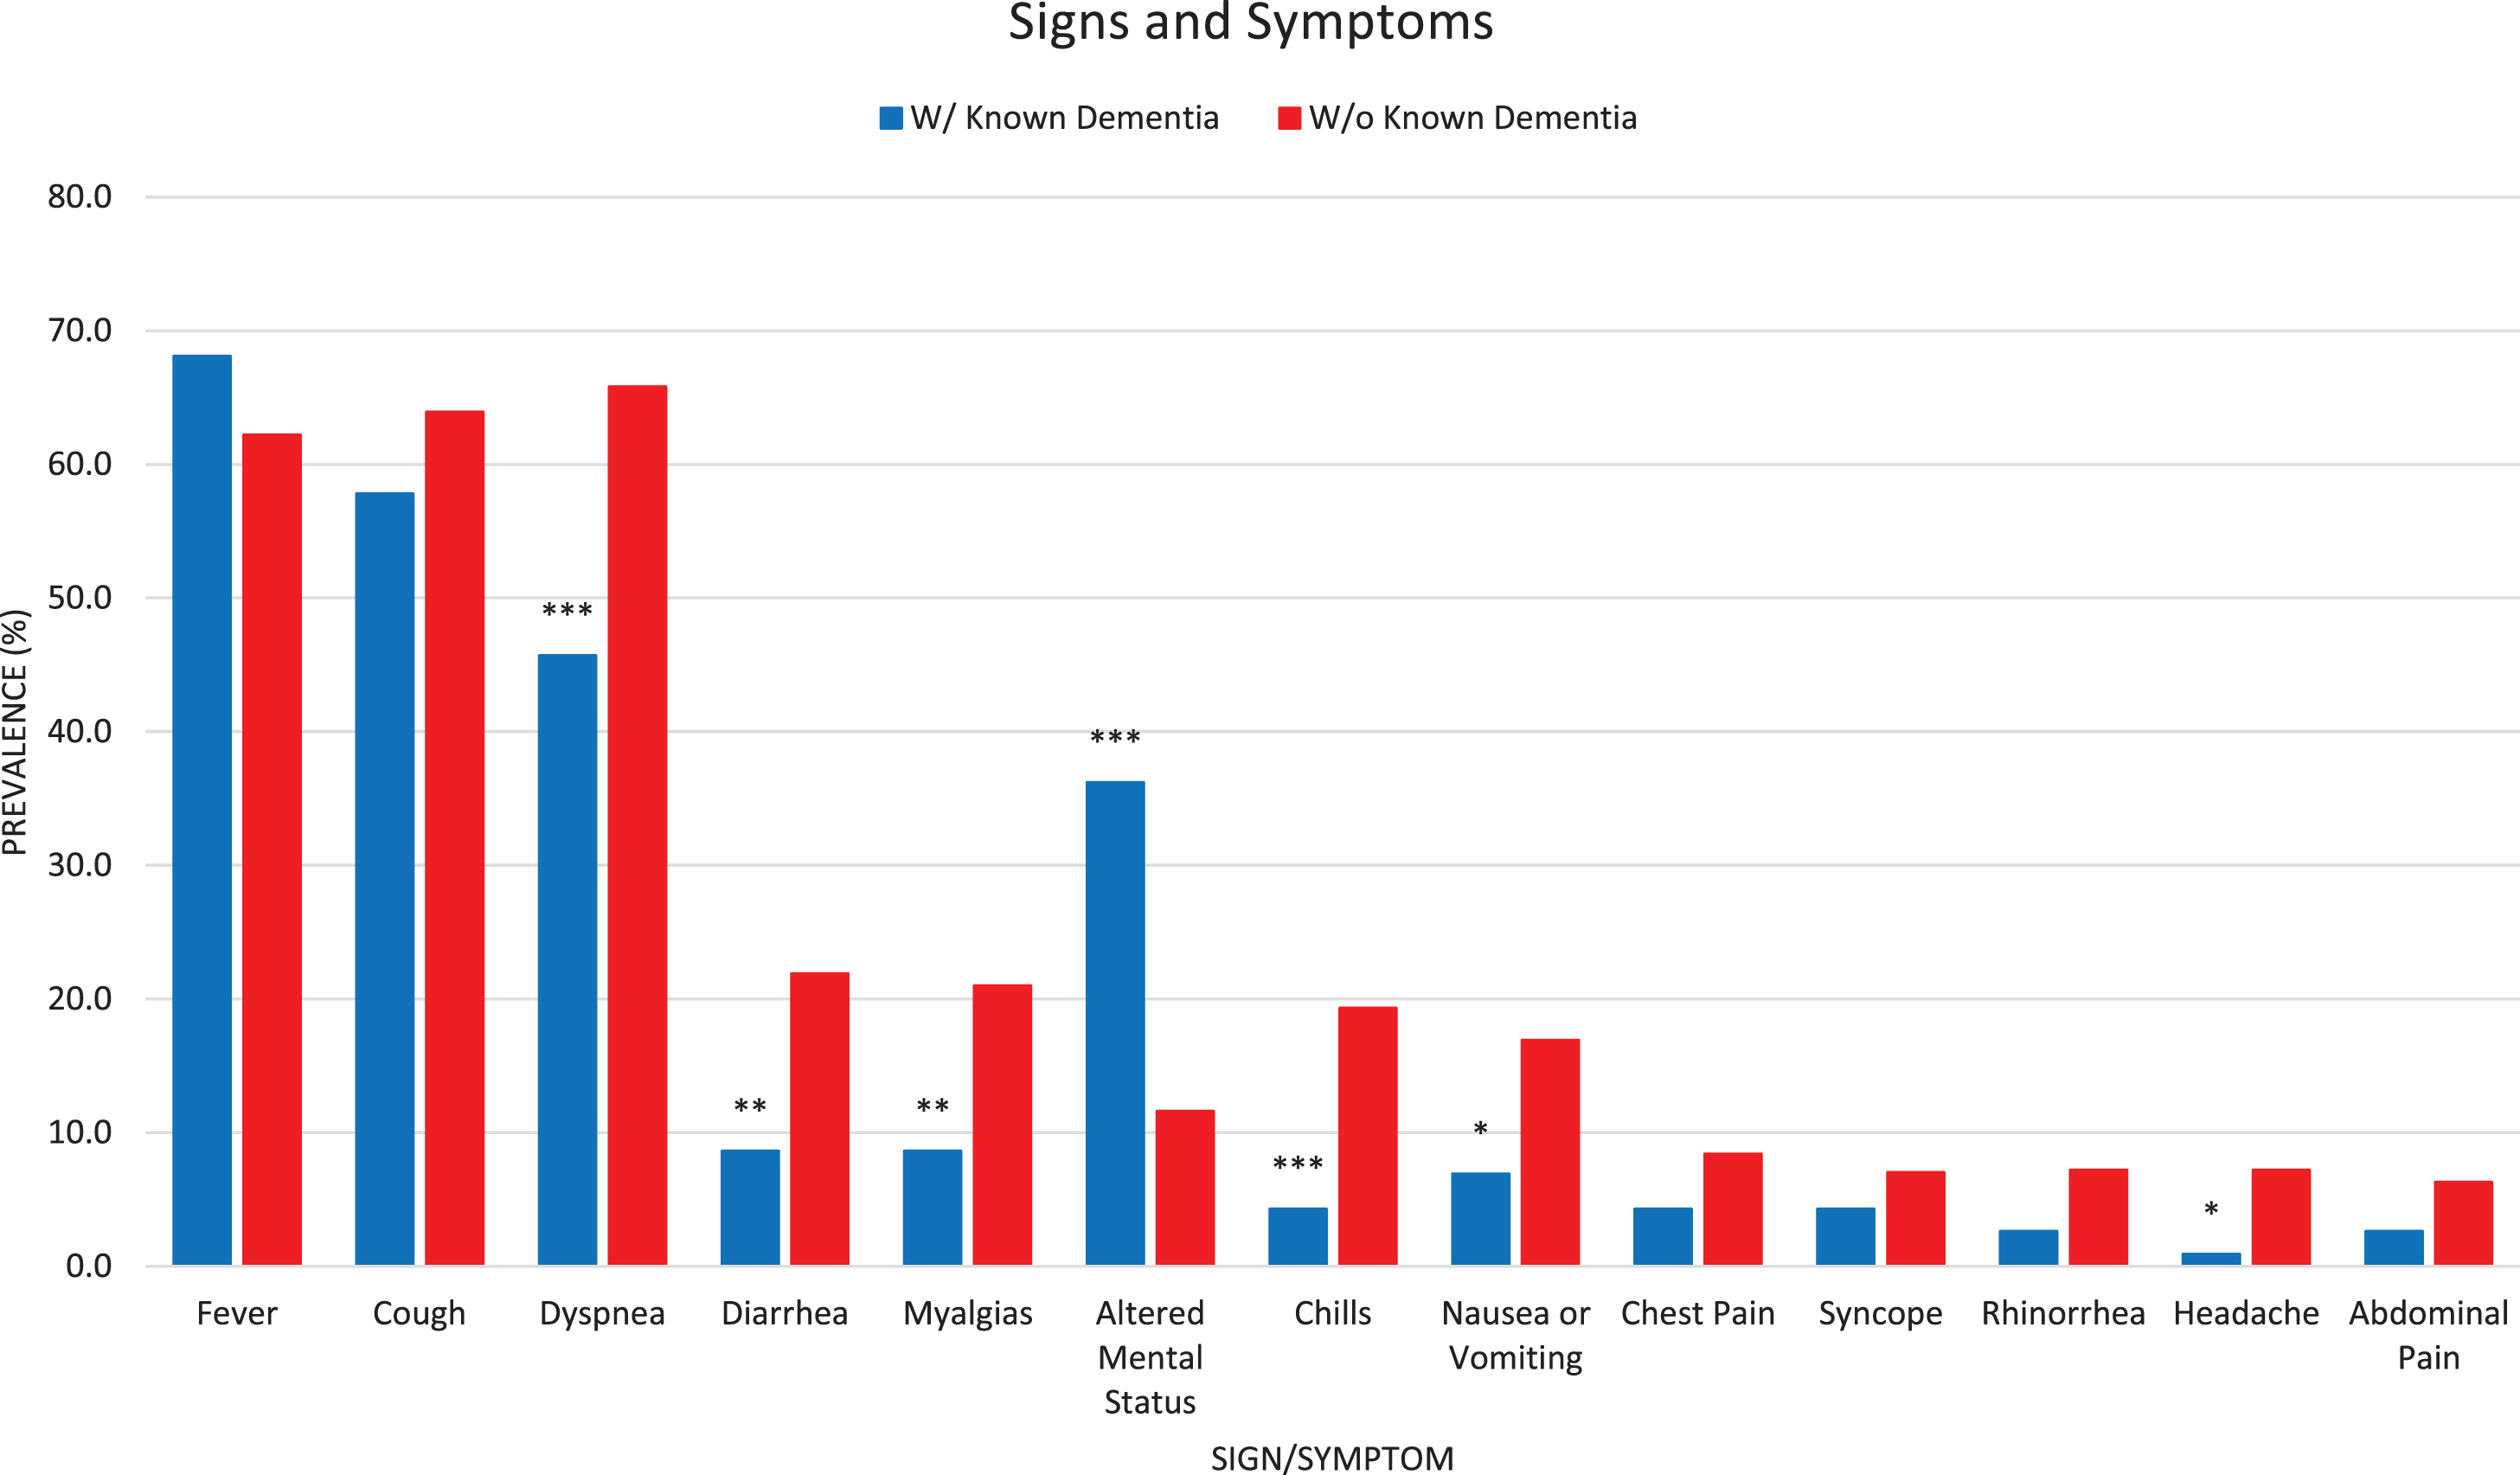 Unadjusted Bar Graph for Signs and Symptoms. Signs and symptoms with greater than 5%total prevalence are presented in a bar graph from highest to lowest prevalence in the total cohort. Patients with previously diagnosed dementia were more likely to present with delirium (altered mental status) and less likely to present with dyspnea, diarrhea, myalgias, chills, nausea/vomiting, and headache. Asterisks indicate statistical significance: ***p < 0.001; **0.001 < p < 0.01; *0.01 < p < 0.05.